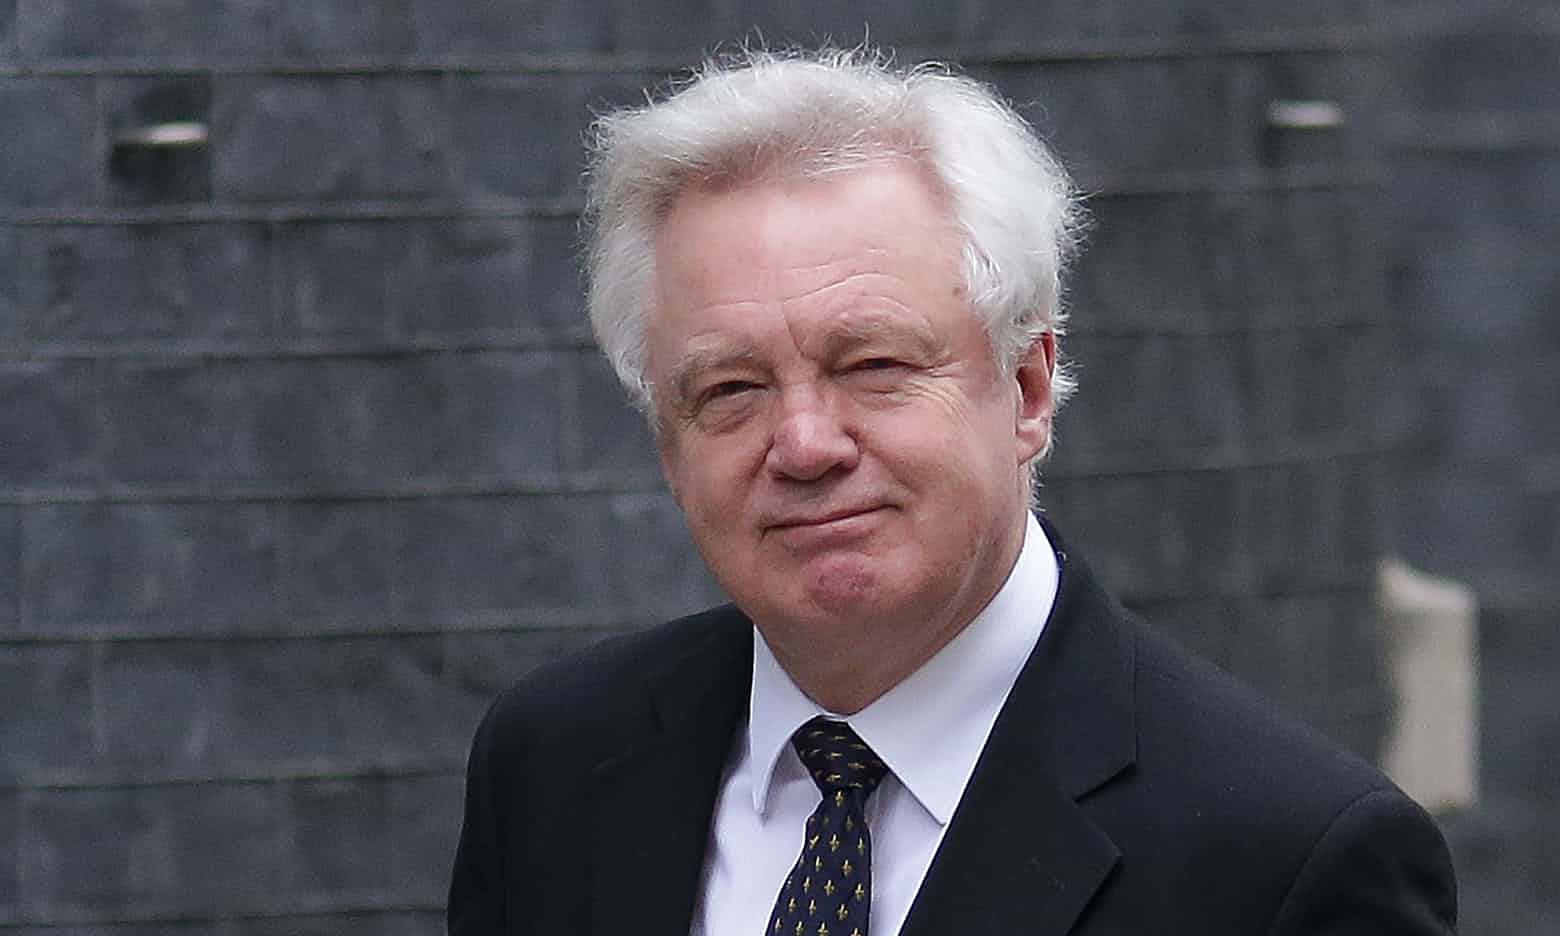 David Davis steps down as Brexit secretary in blow to Theresa May – live updates